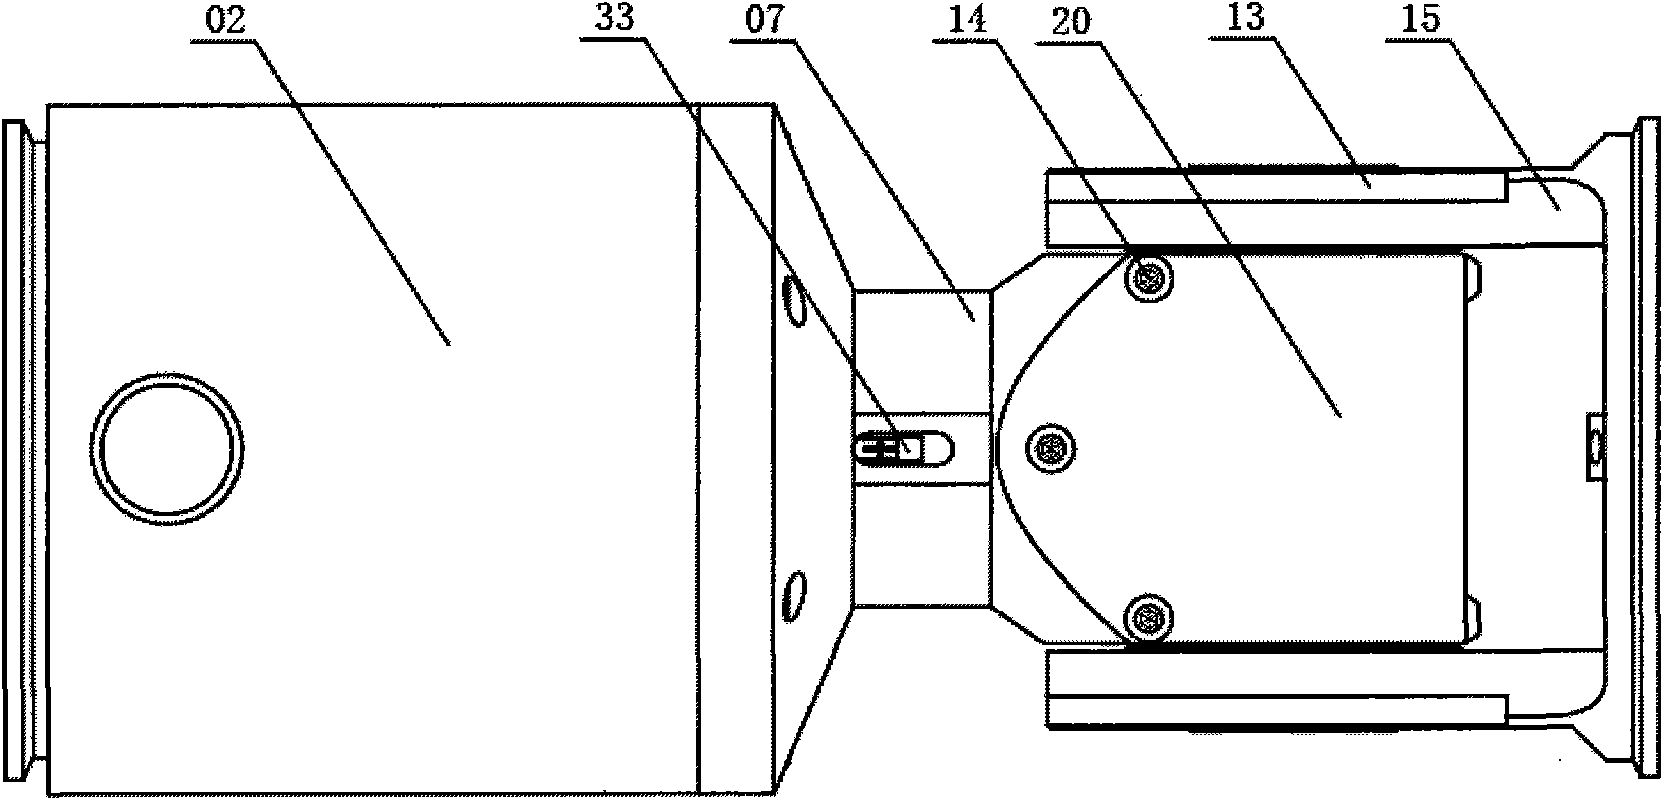 Rotating and swinging joint module of robot of single degree of freedom